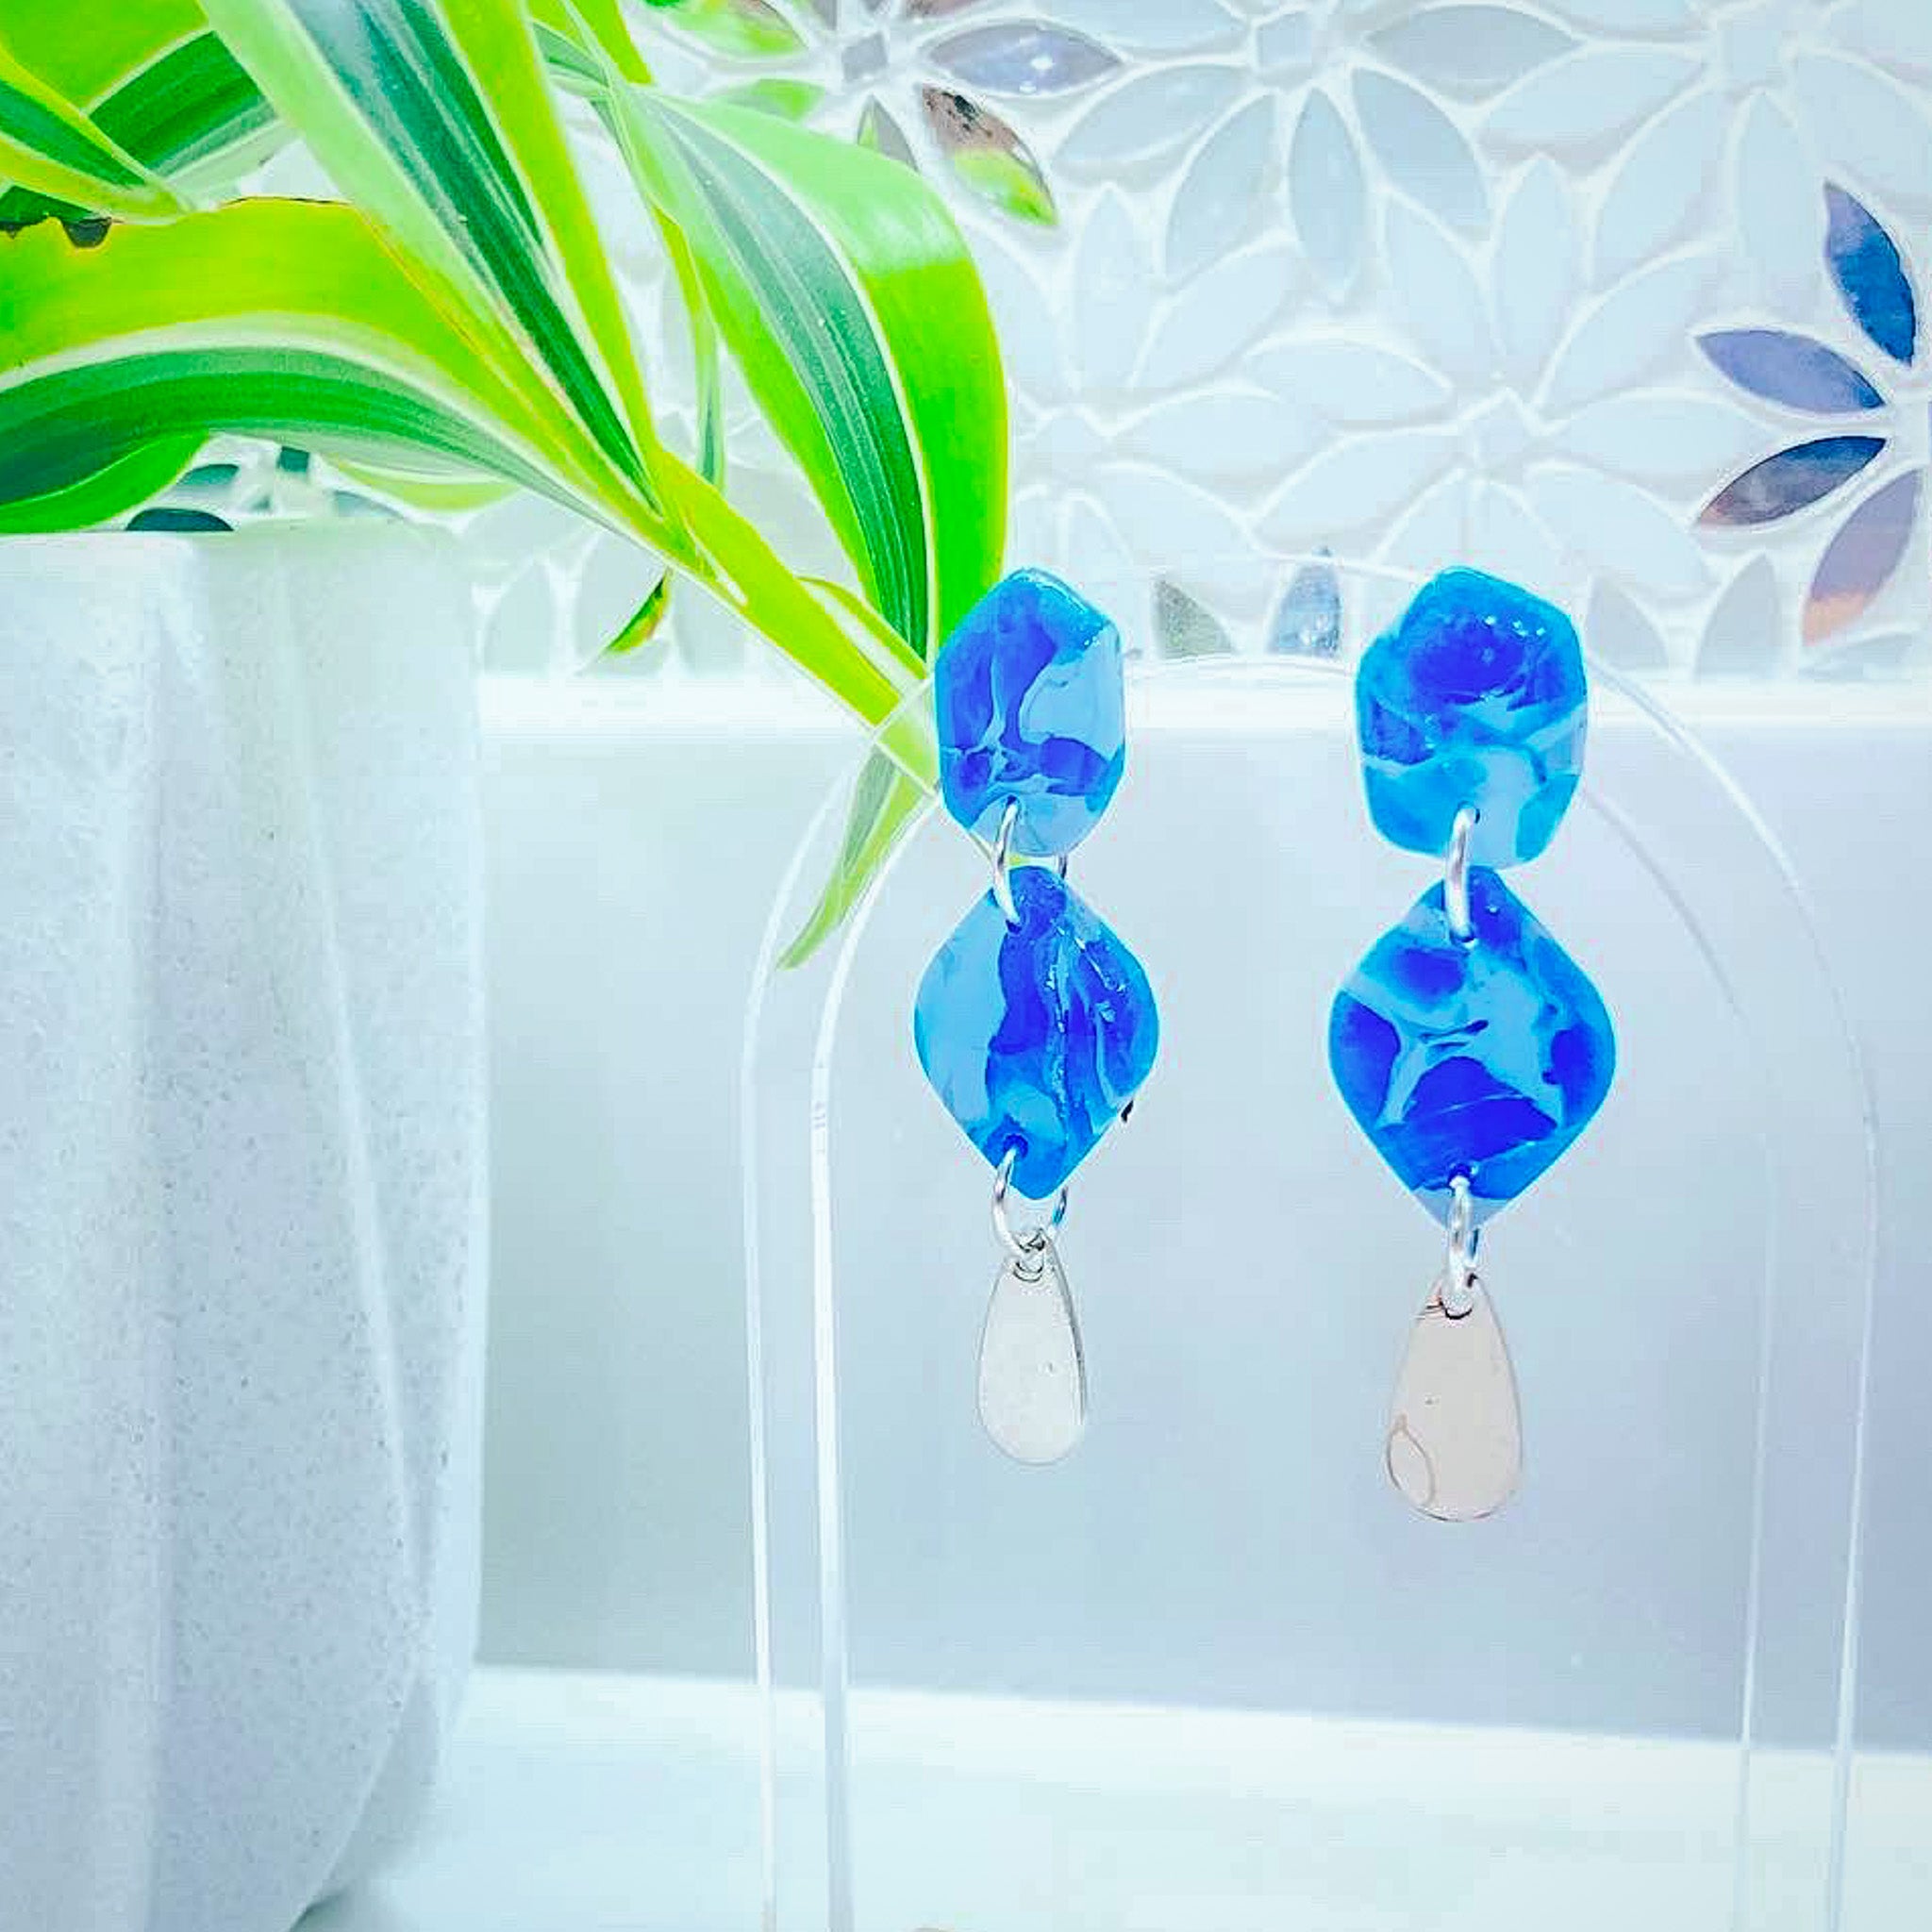 Handcrafted polymer clay earrings in marbled cornflower and sapphire blue with a silver teardrop charm, displayed on a clear acrylic arch with a bright green plant in a white geometric pot in the background.